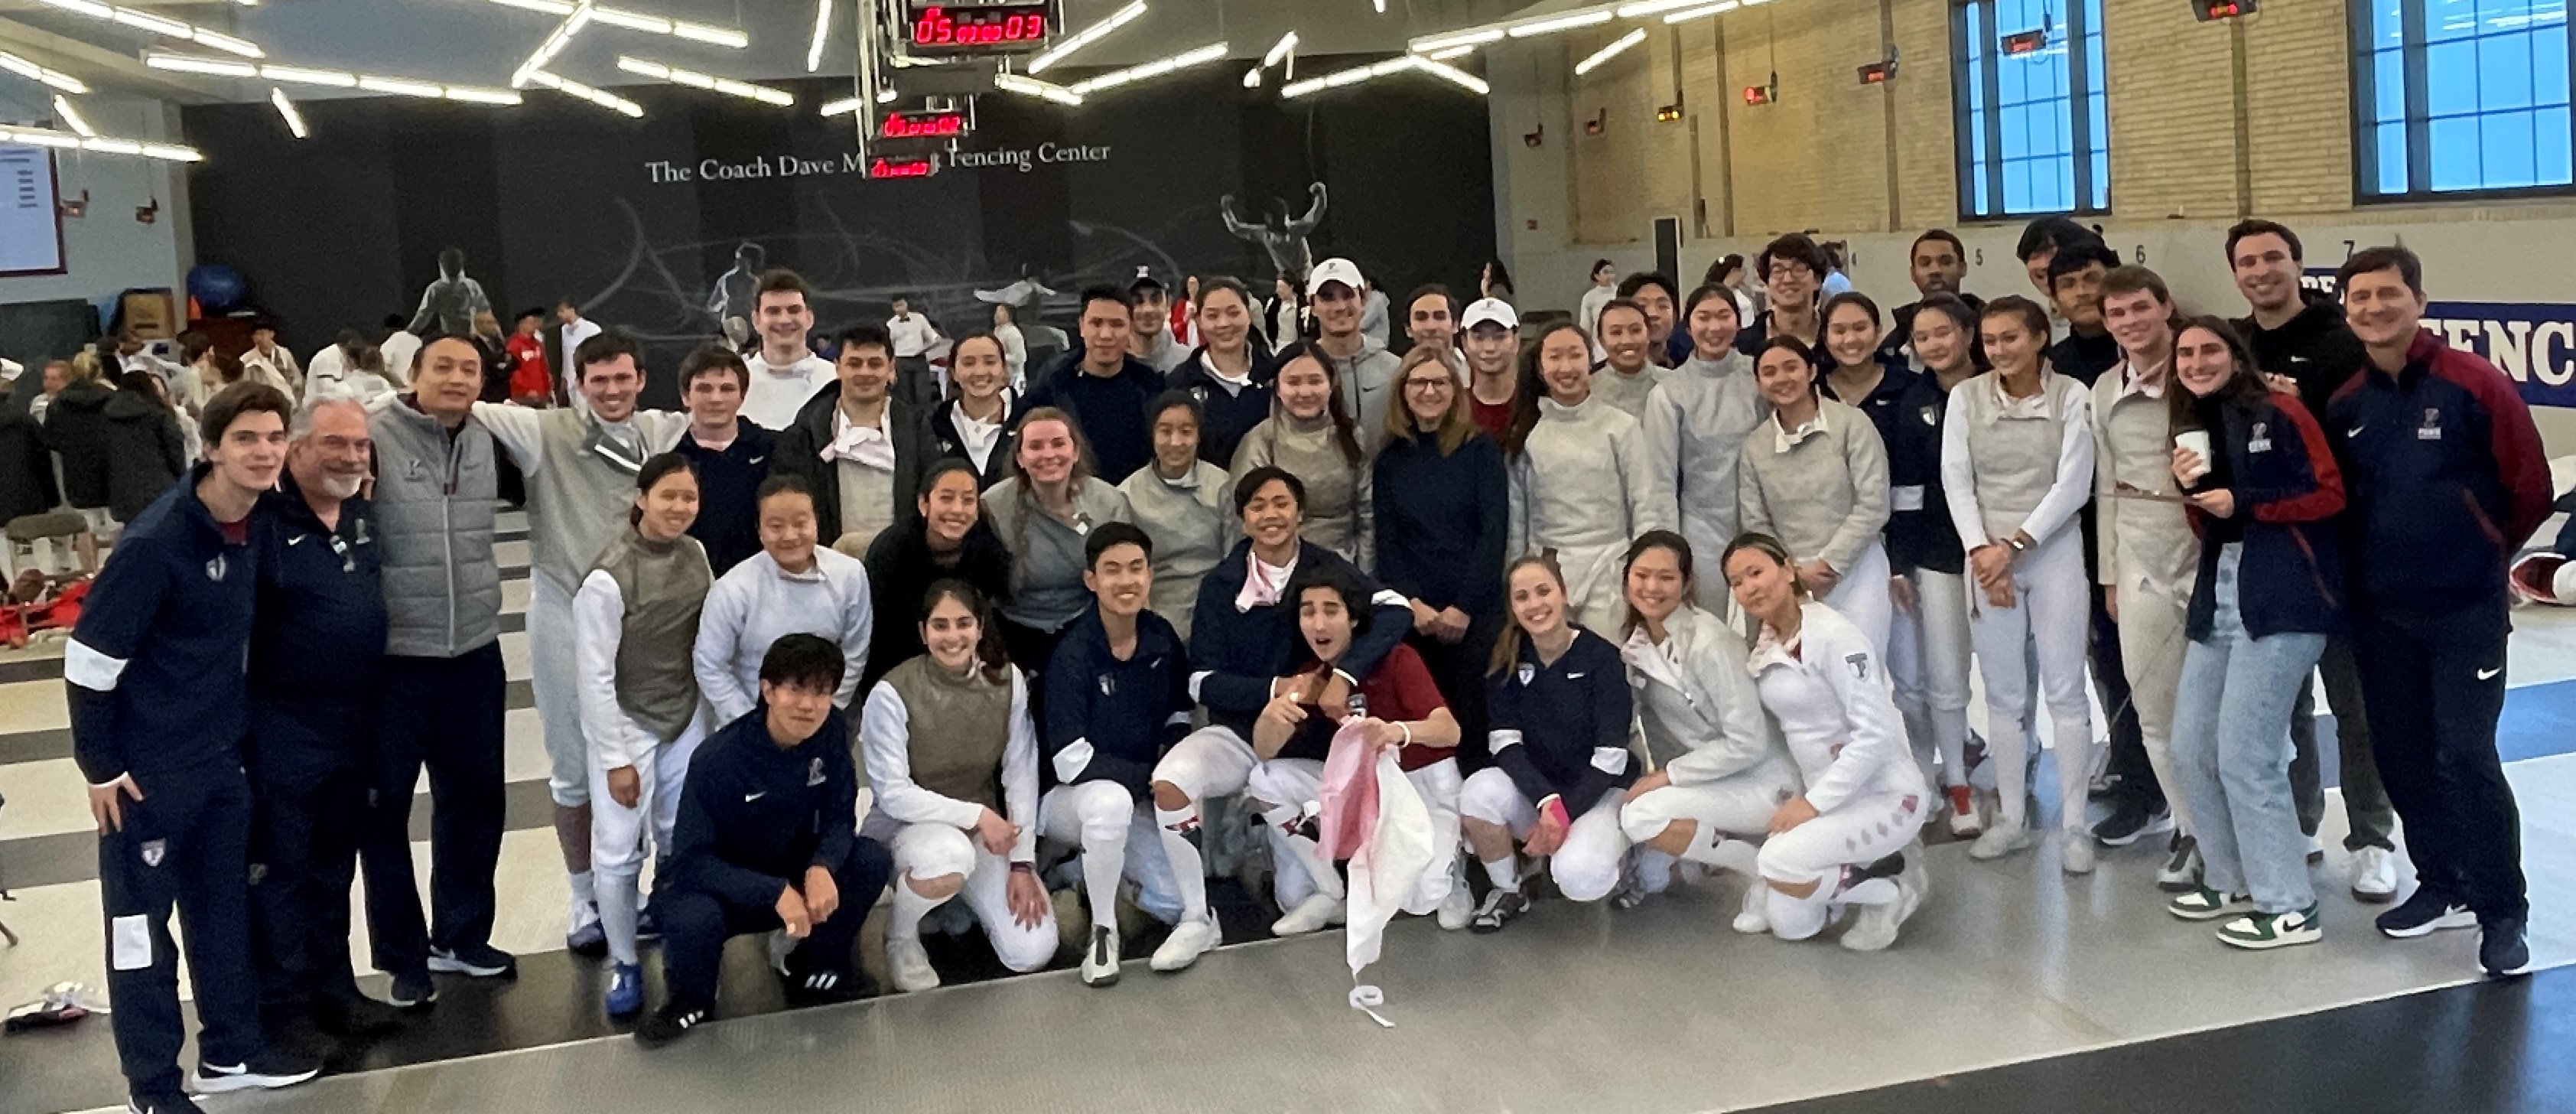 President Liz Magill (second row, center right, in all black) poses with members of the men’s and women’s fencing teams at the Elite Invitational.